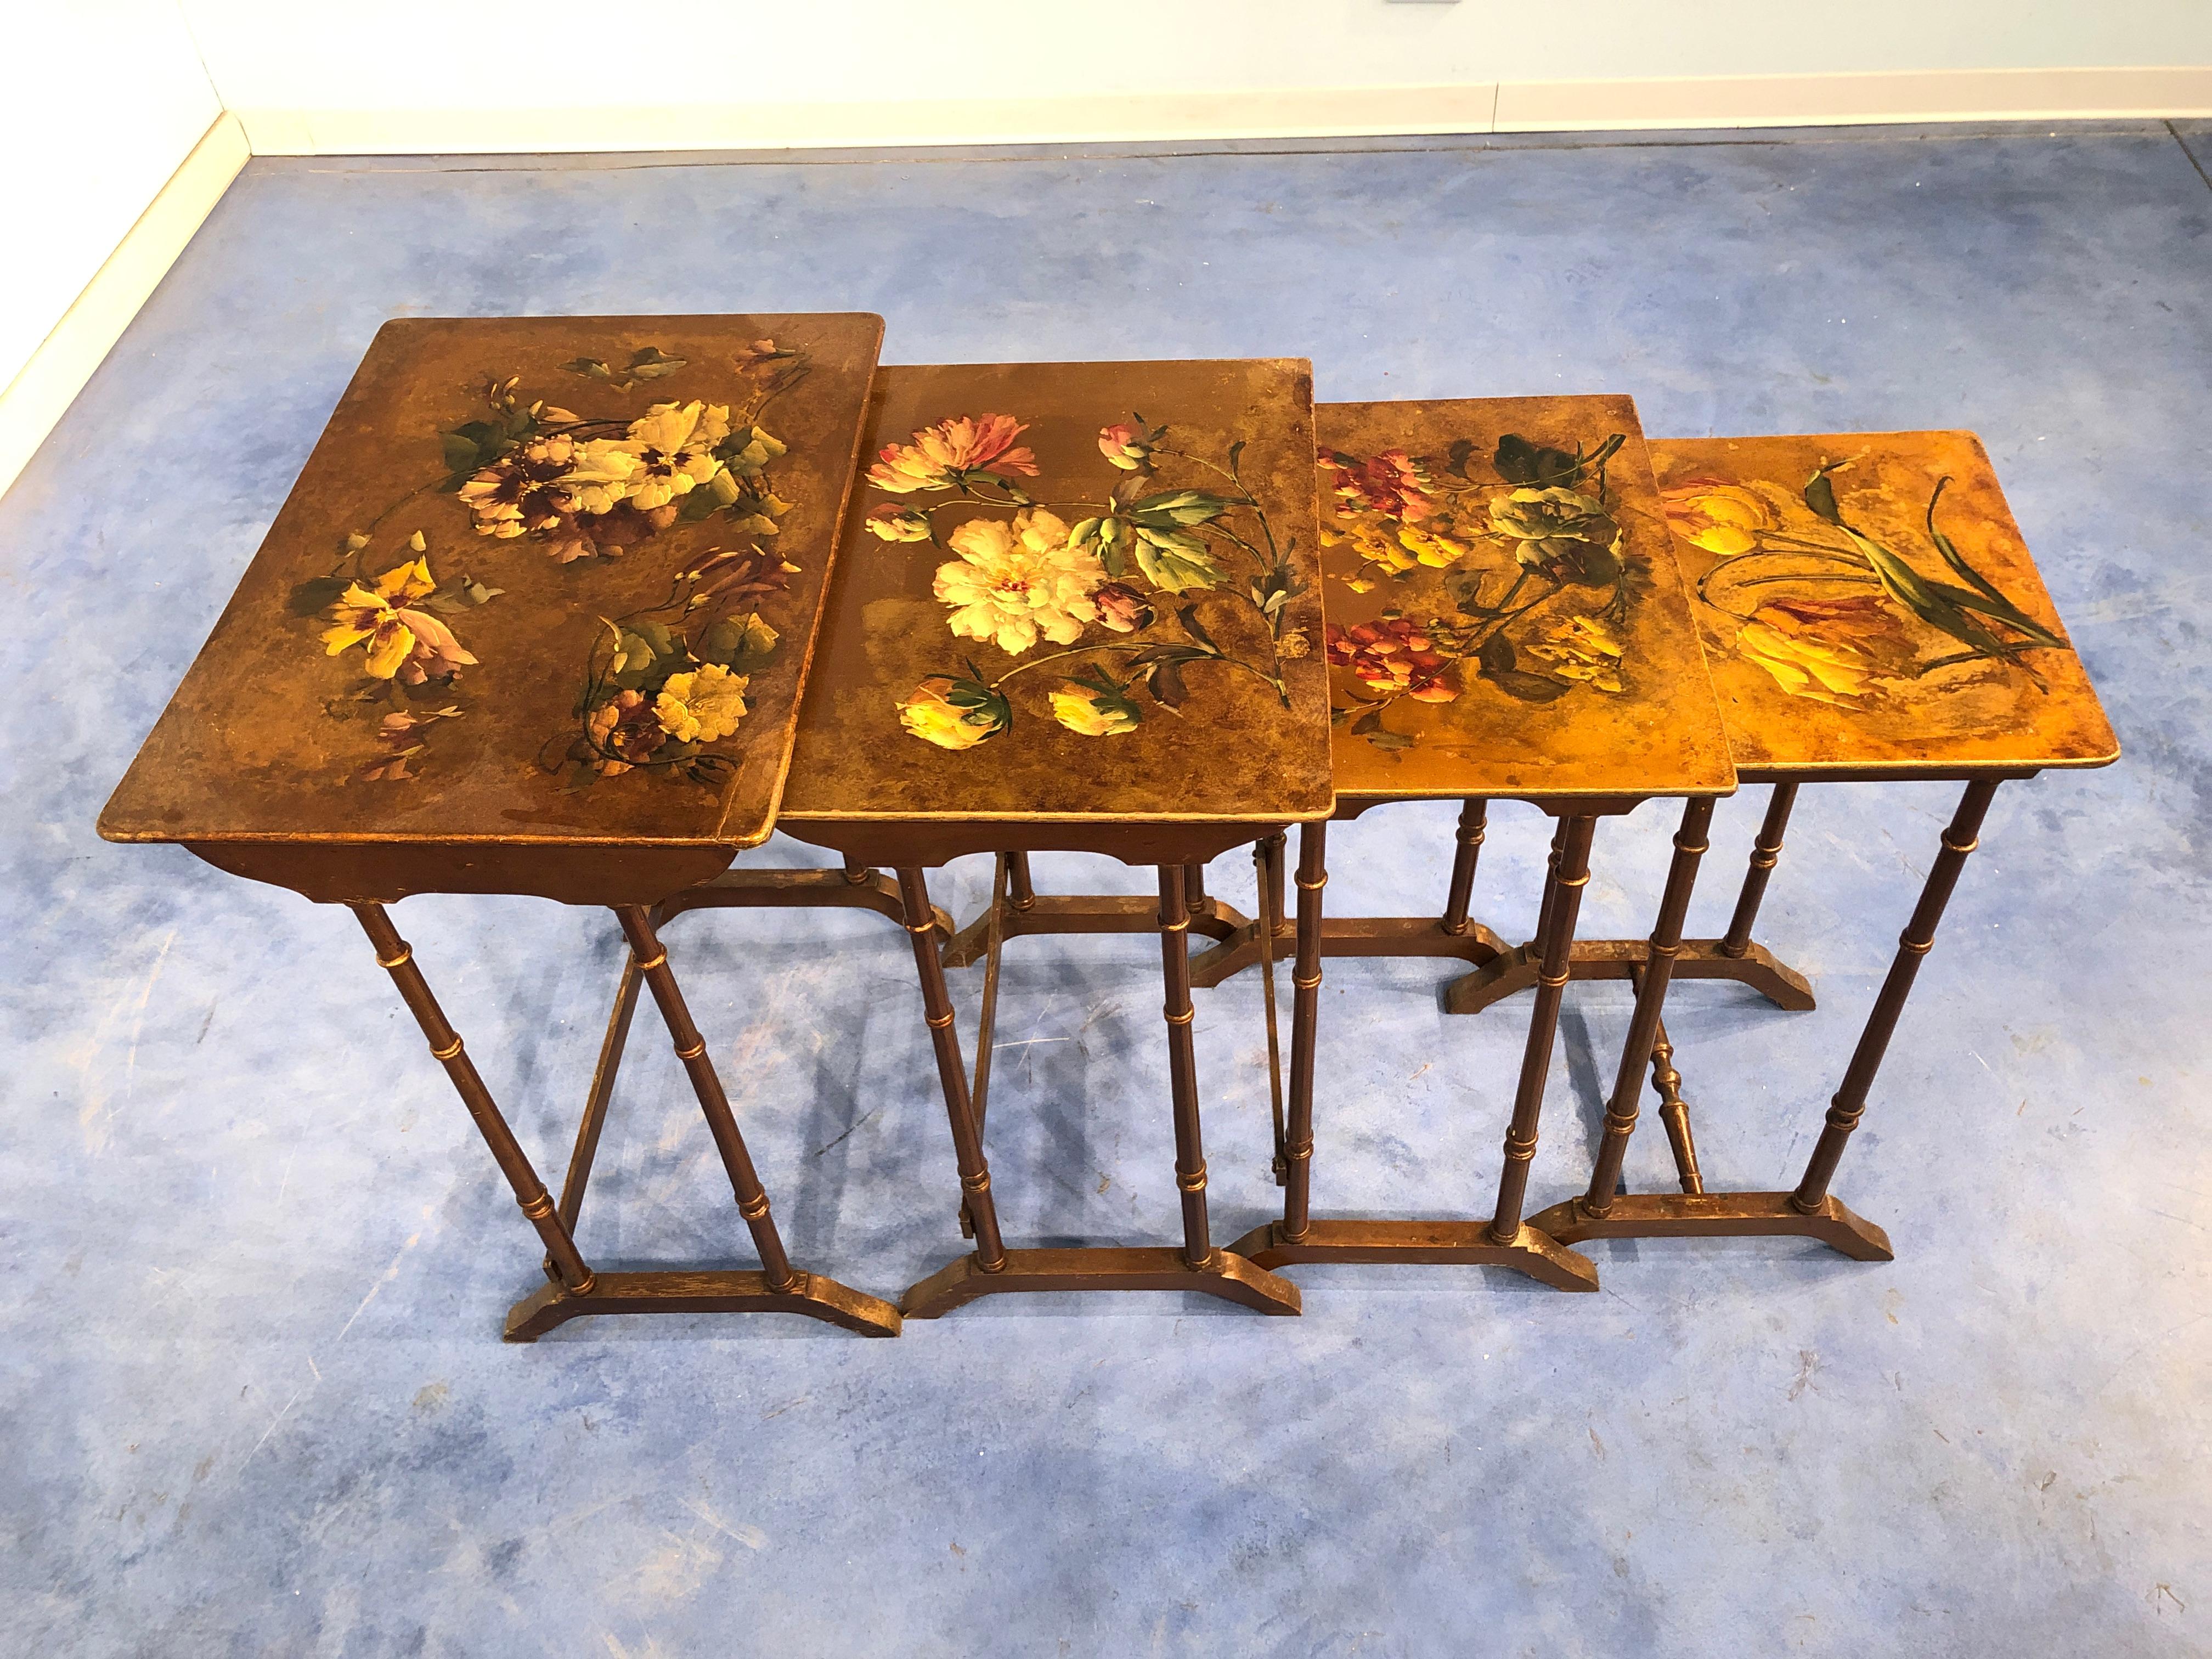 An astonishing batch of 4 coffee tables,
on the top decorated with floral painting in the Liberty style.
You can see also legs in bamboo shape, a characteristic element from the period. 

Originals of the era, no reproductions.
In very good